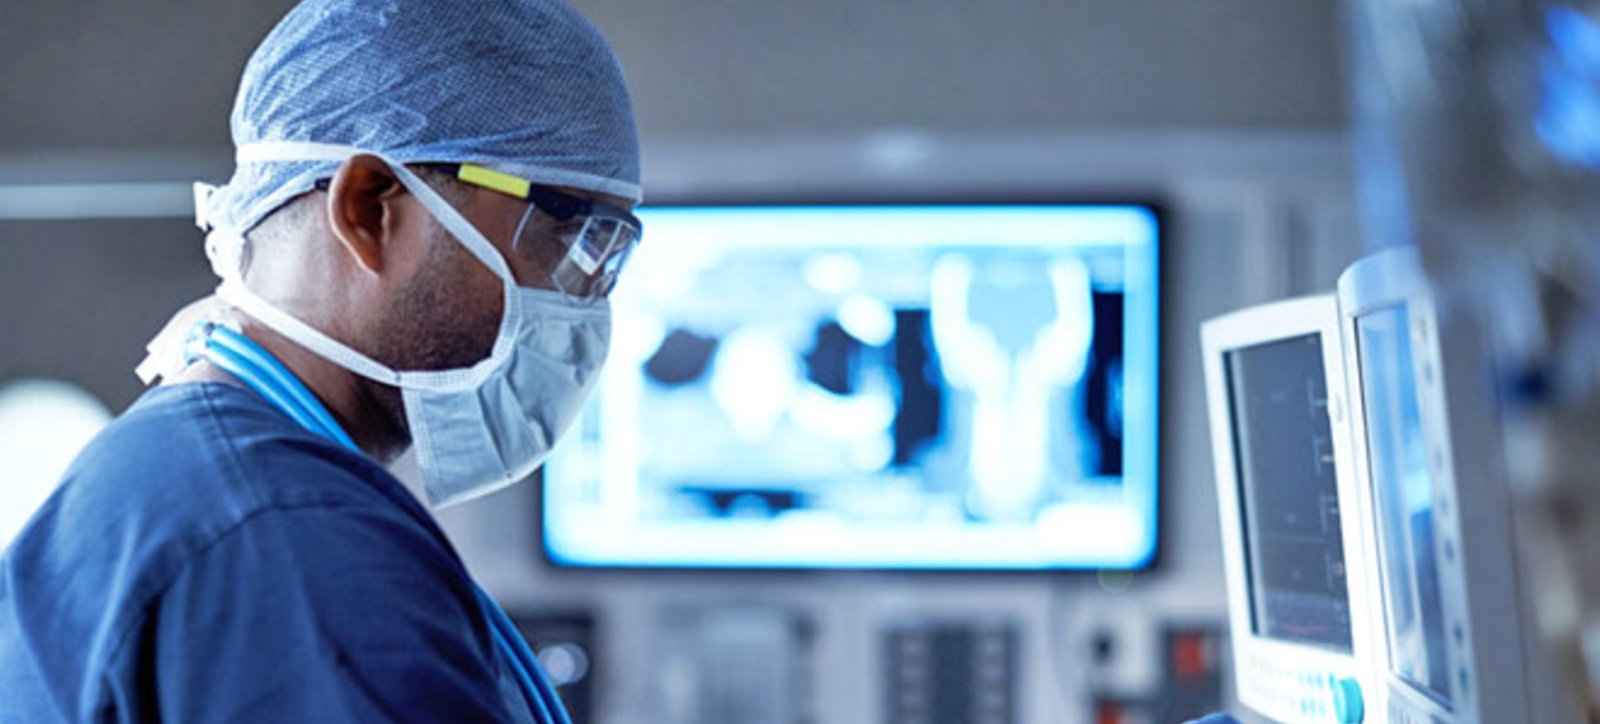 A surgeon in the operating theatre